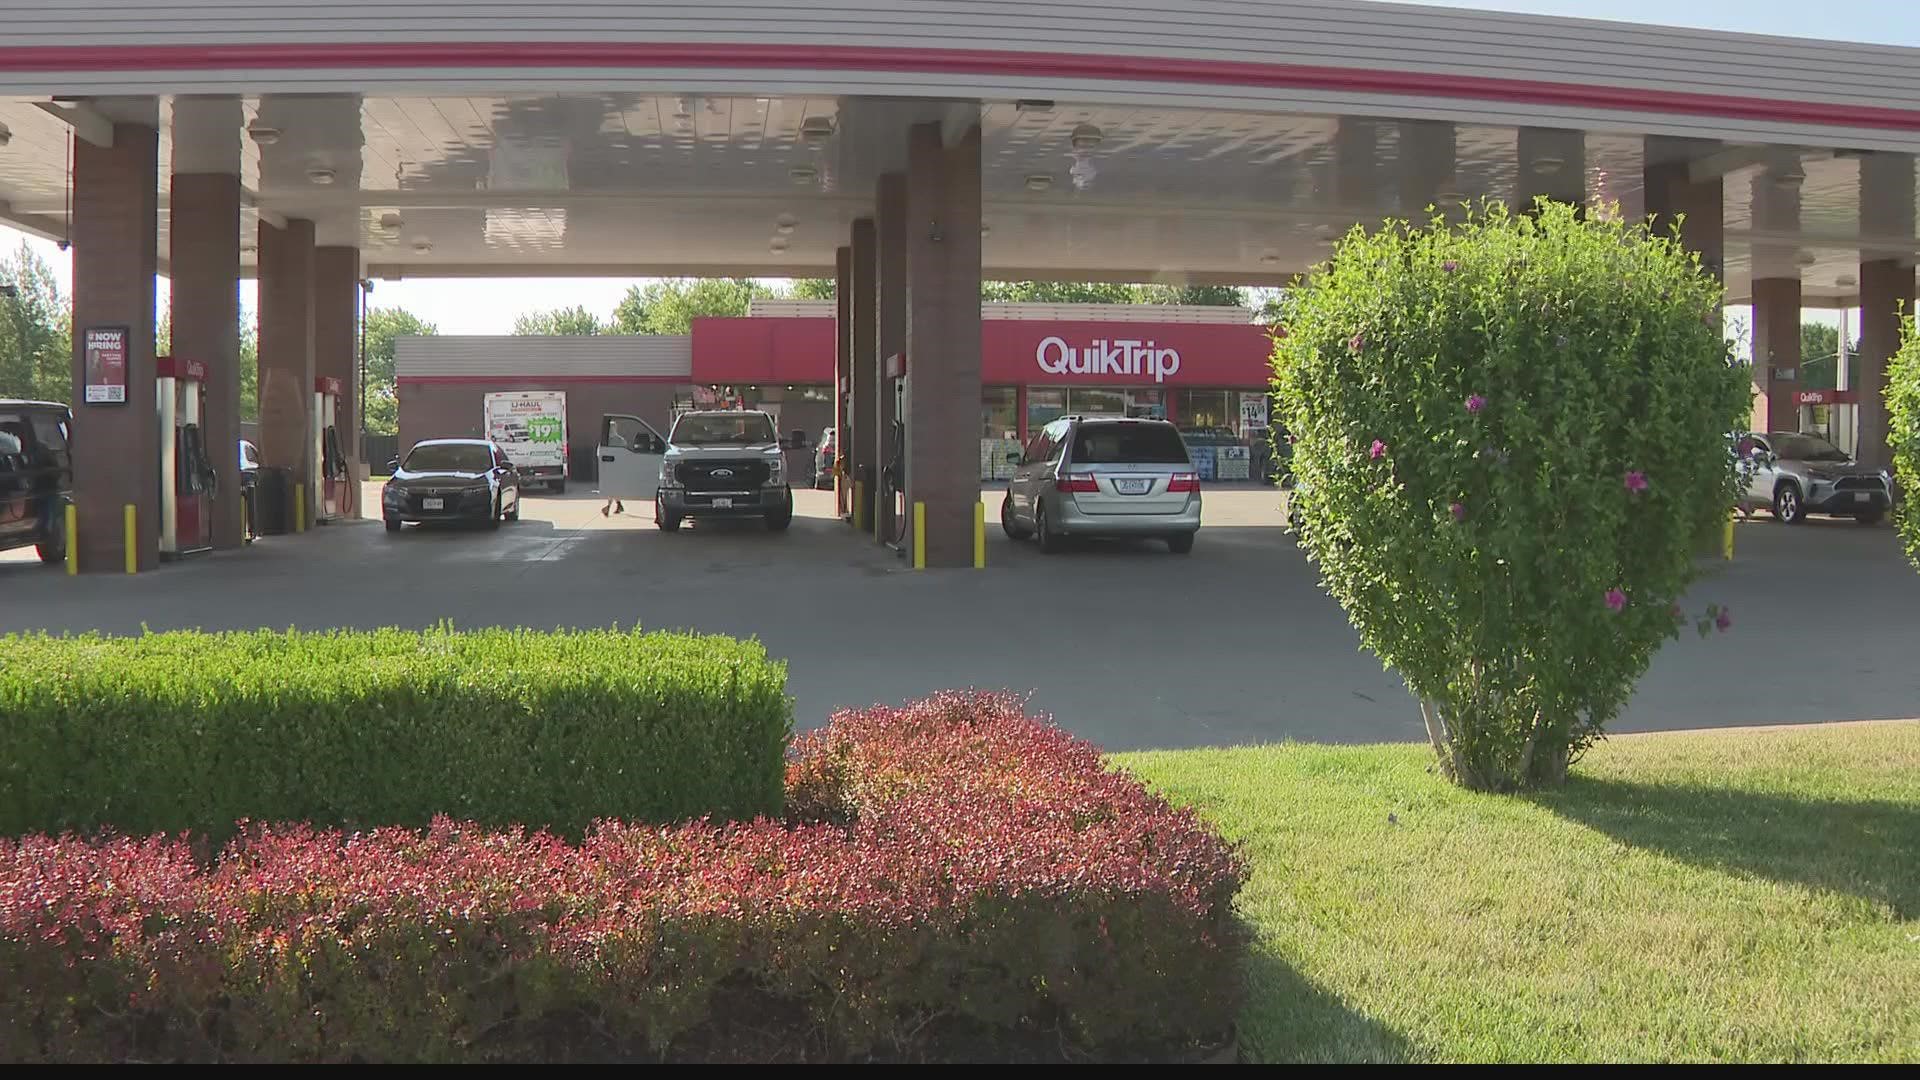 The suspect was killed by a customer who police say witnessed a robbery taking place at QuikTrip. St. Charles police believe the suspect is tied to three incidents.